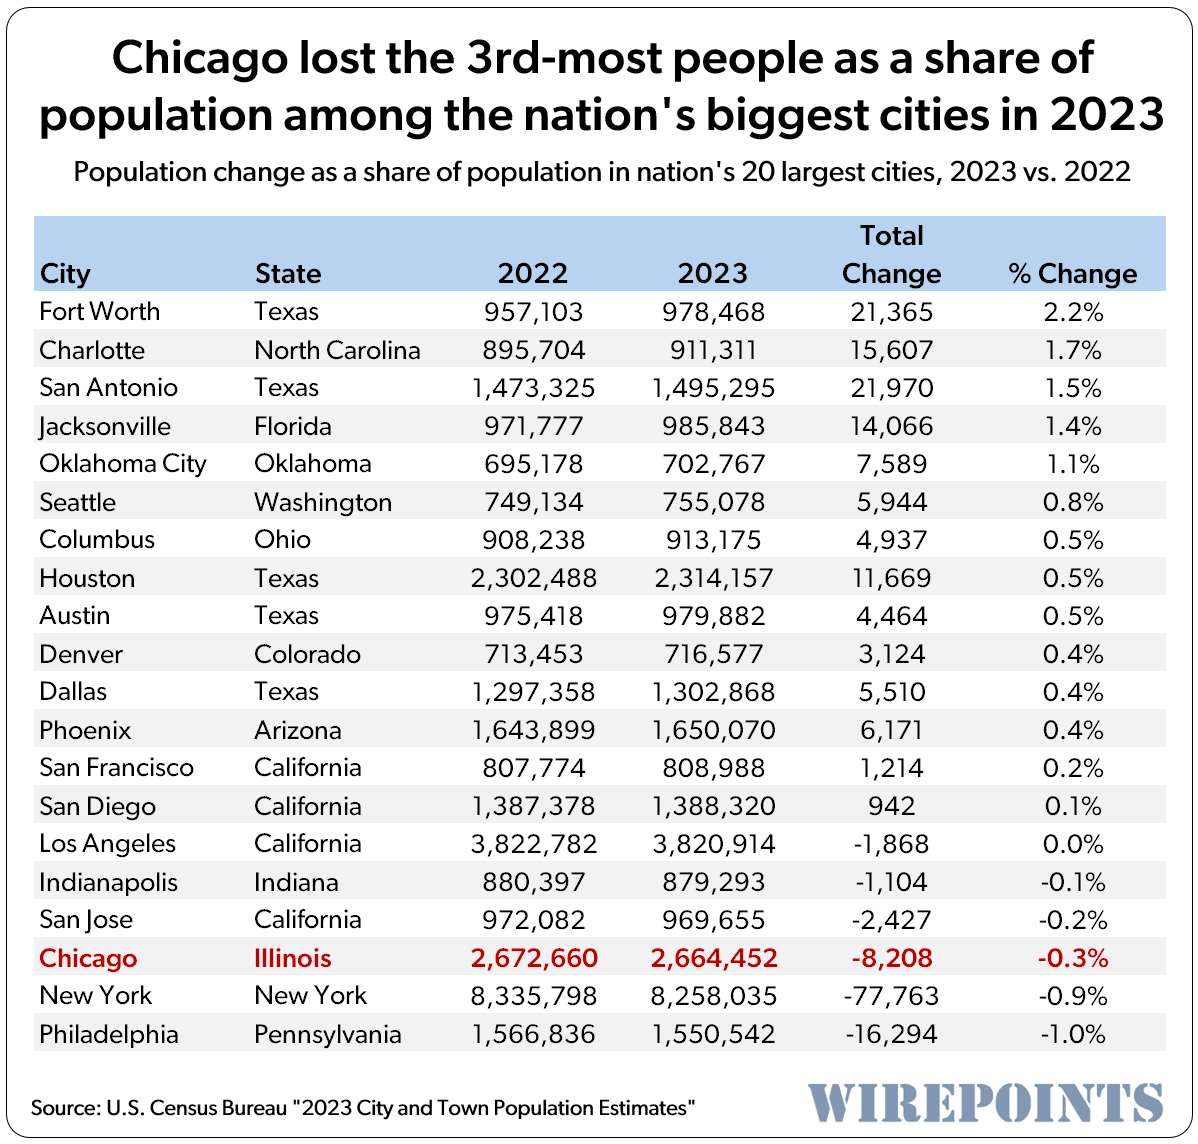 https://eadn-wc01-3158345.nxedge.io/wp-content/uploads/2024/05/Chicago-lost-the-3rd-most-people-as-a-share-of-population-among-the-nations-biggest-cities-in-2023-T.png